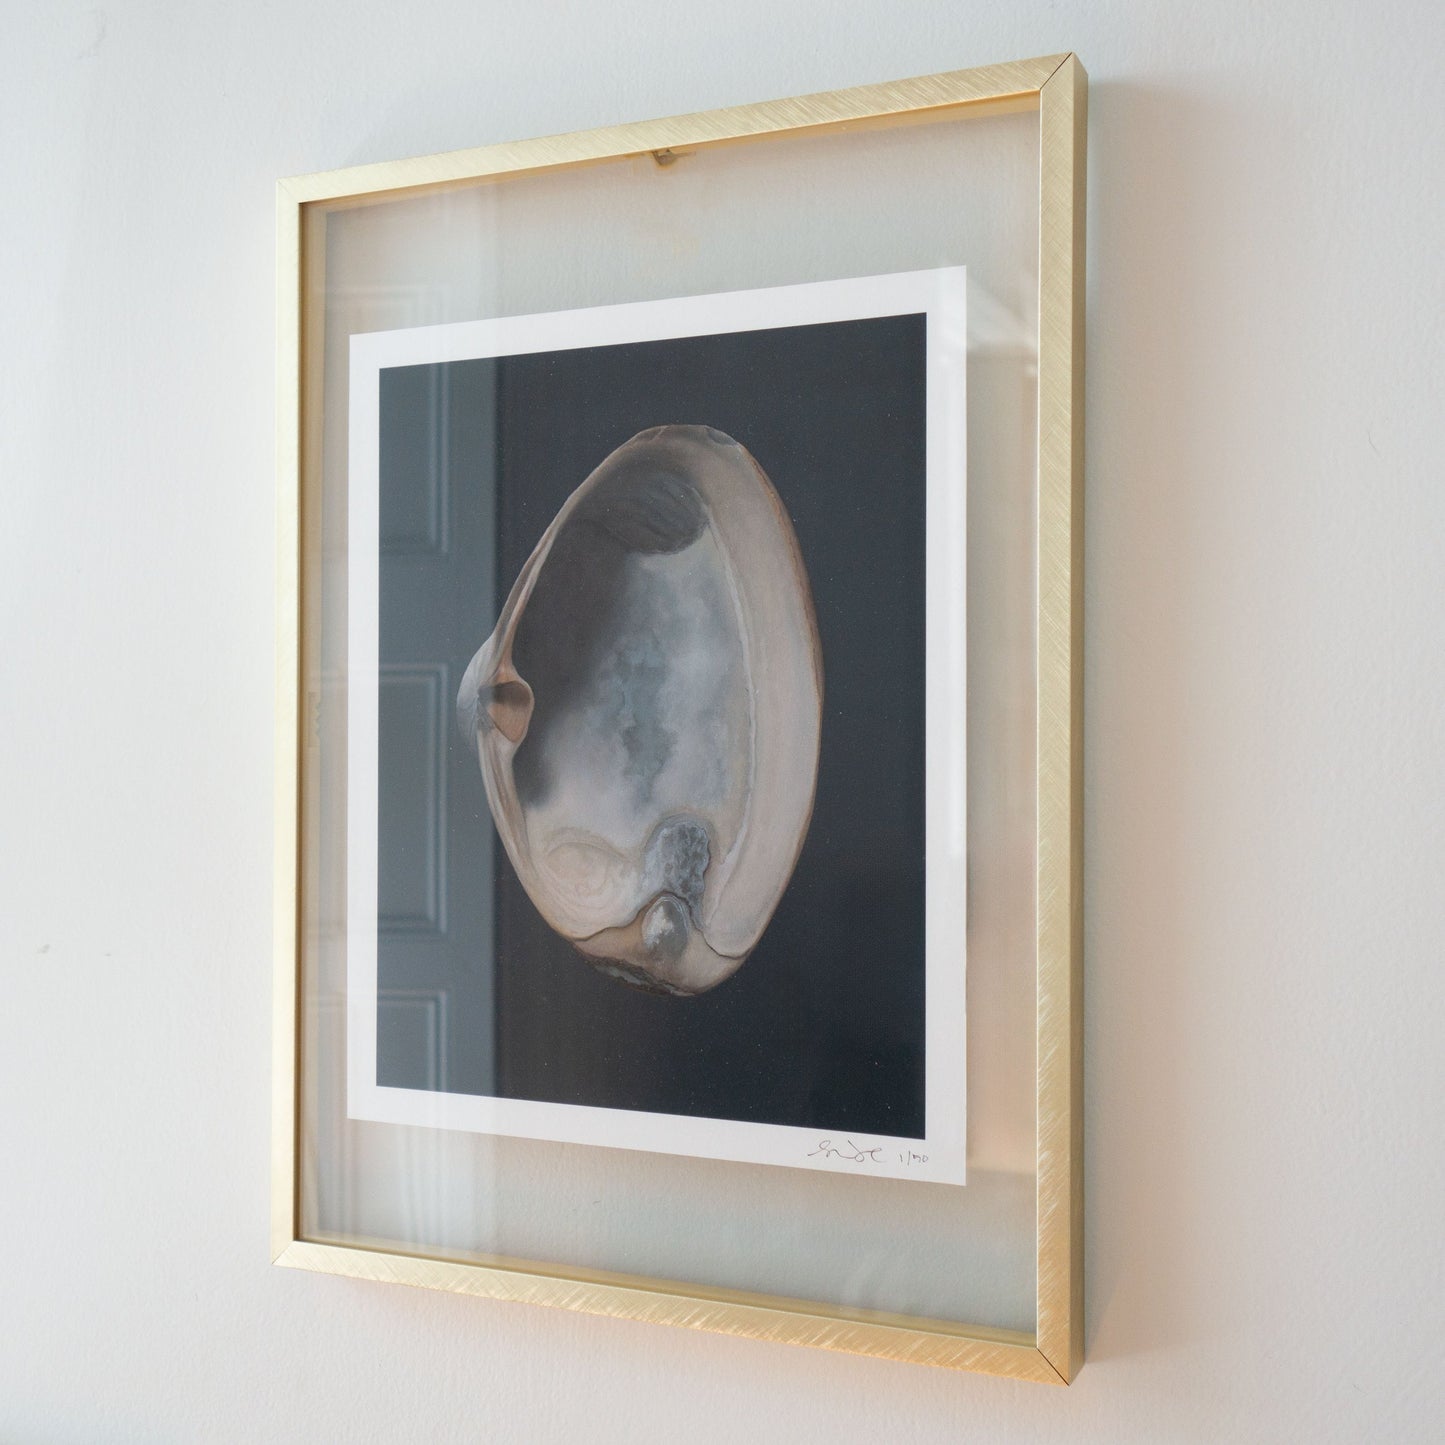 Light Clam Shell No. 2 Limited Edition Print